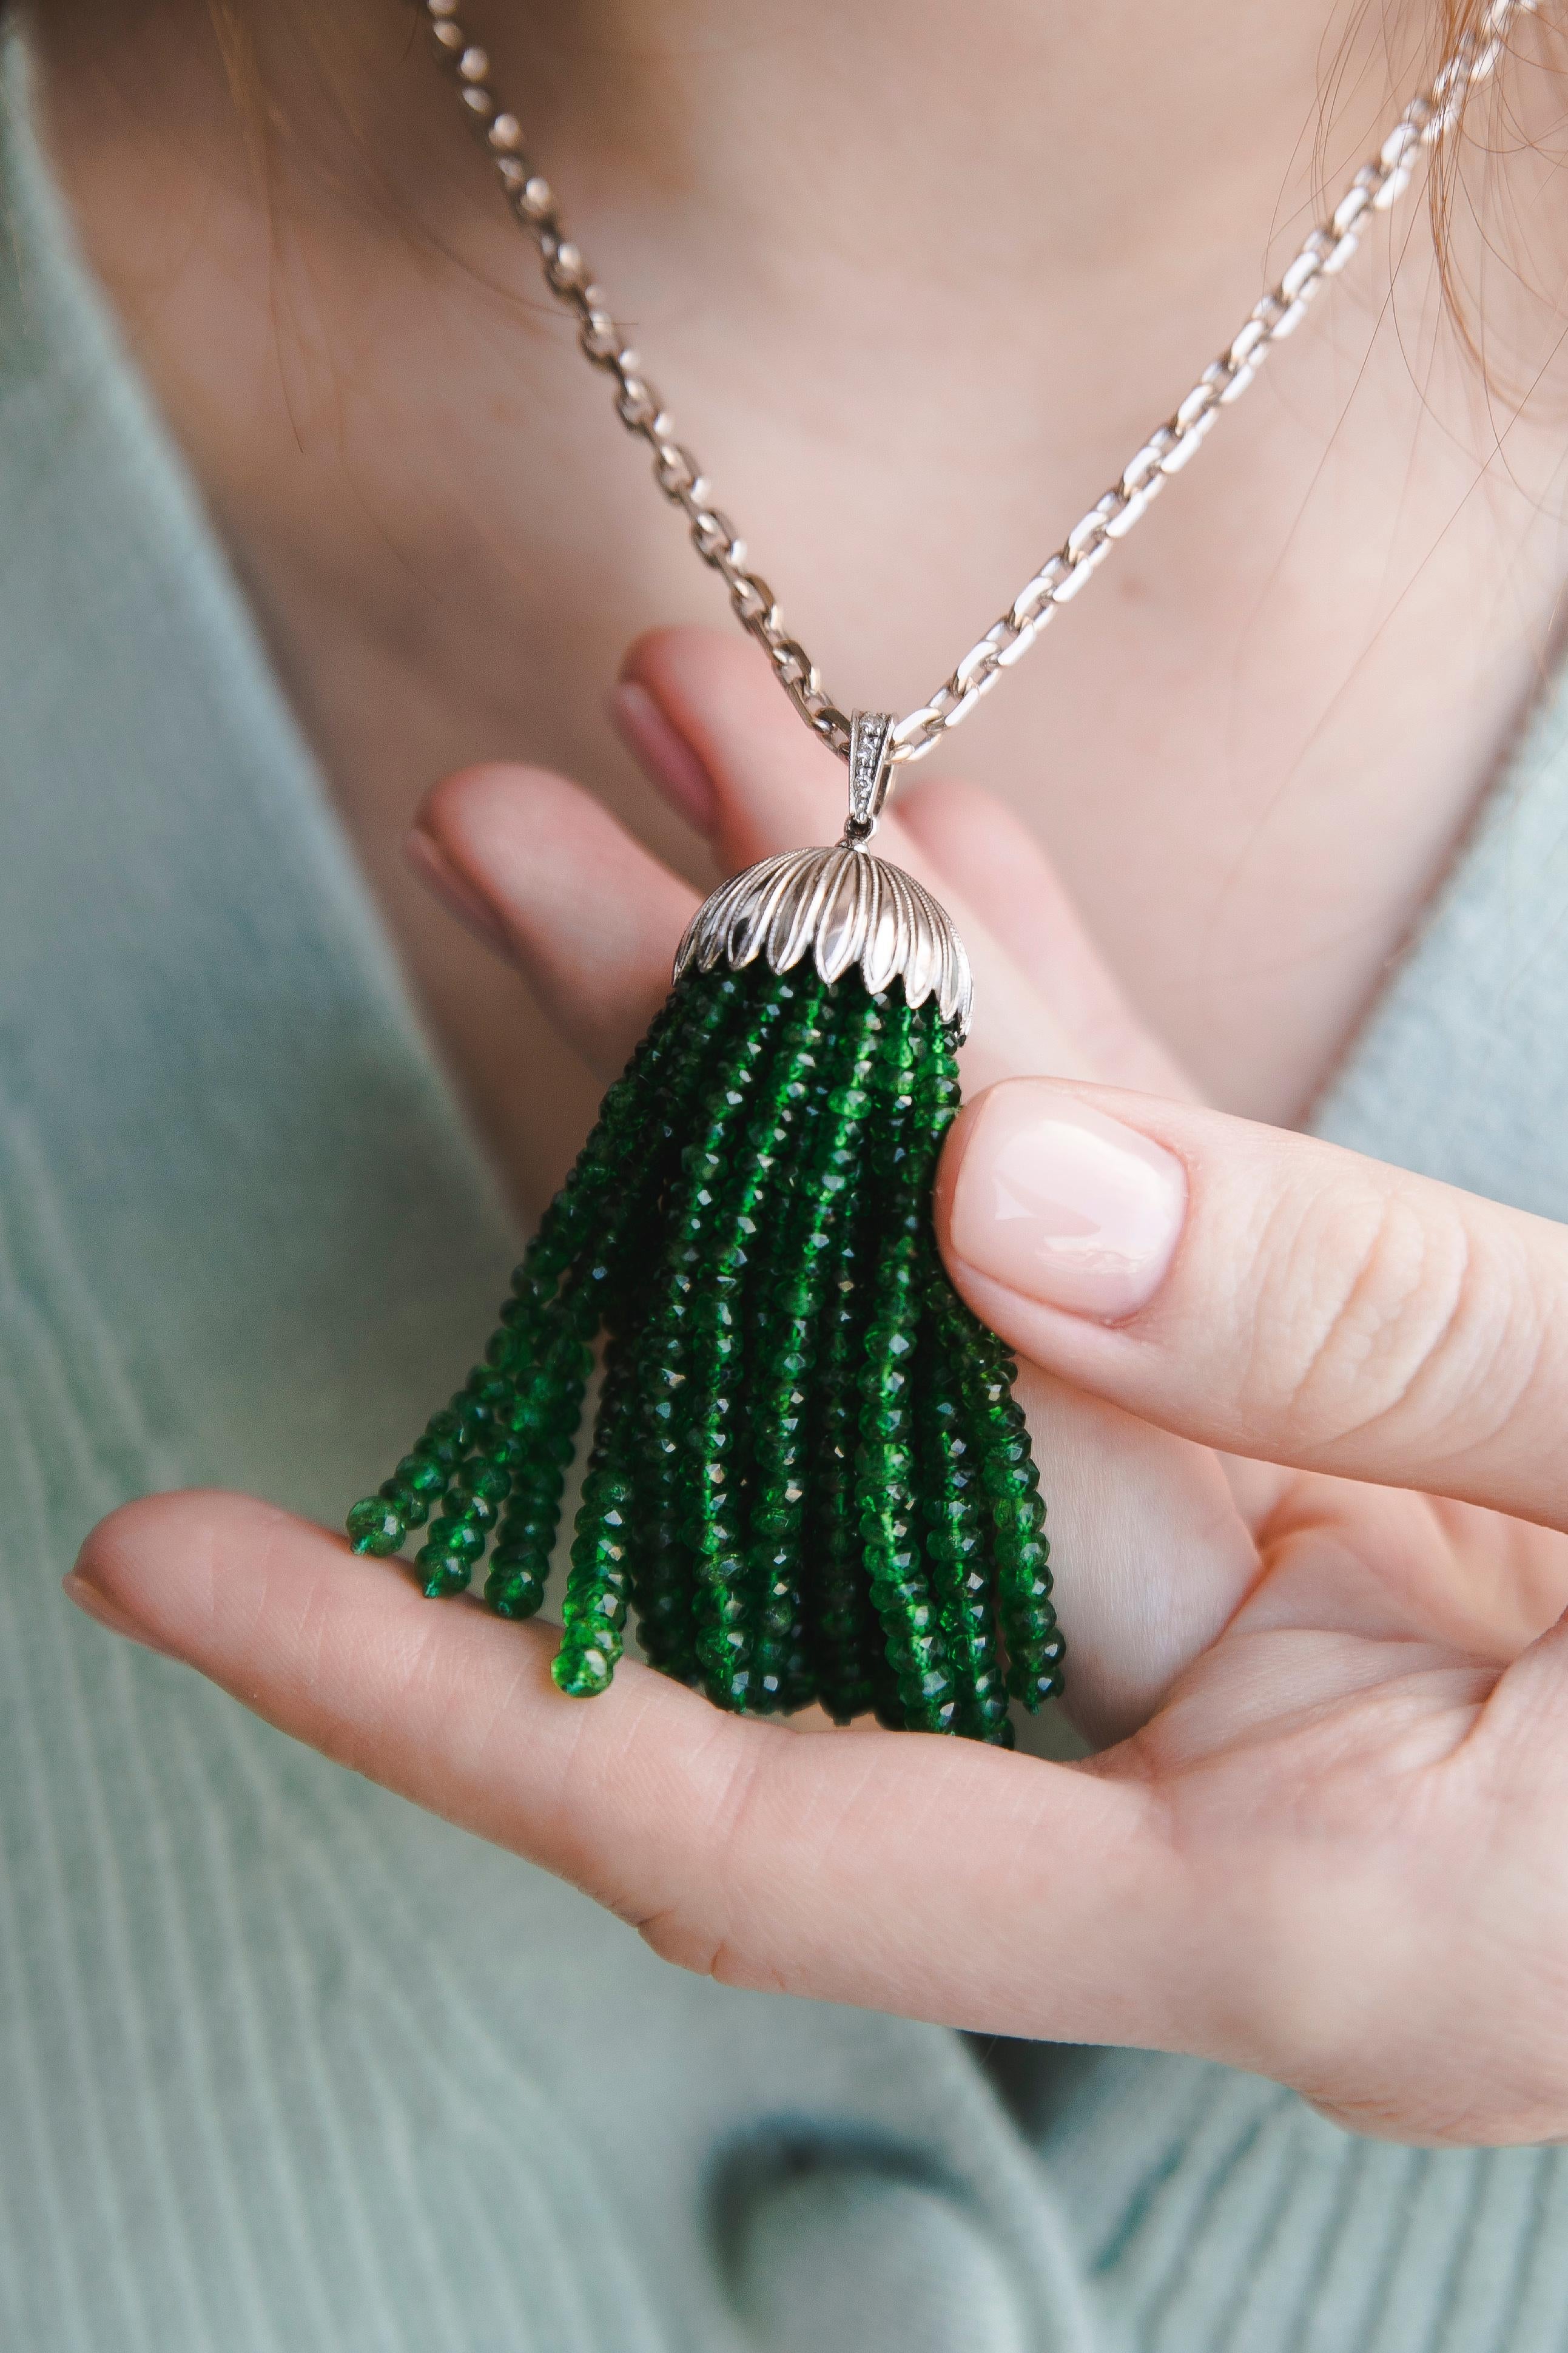 Emeralds Diamonds Platinum Pendant Chain. Created around 1920.
Platinum Pendant with Emeralds beads on a white Gold chain. The pendant consists of a Platinum dome with 30 separate and independent Emerald threads. The loop between the dome and the